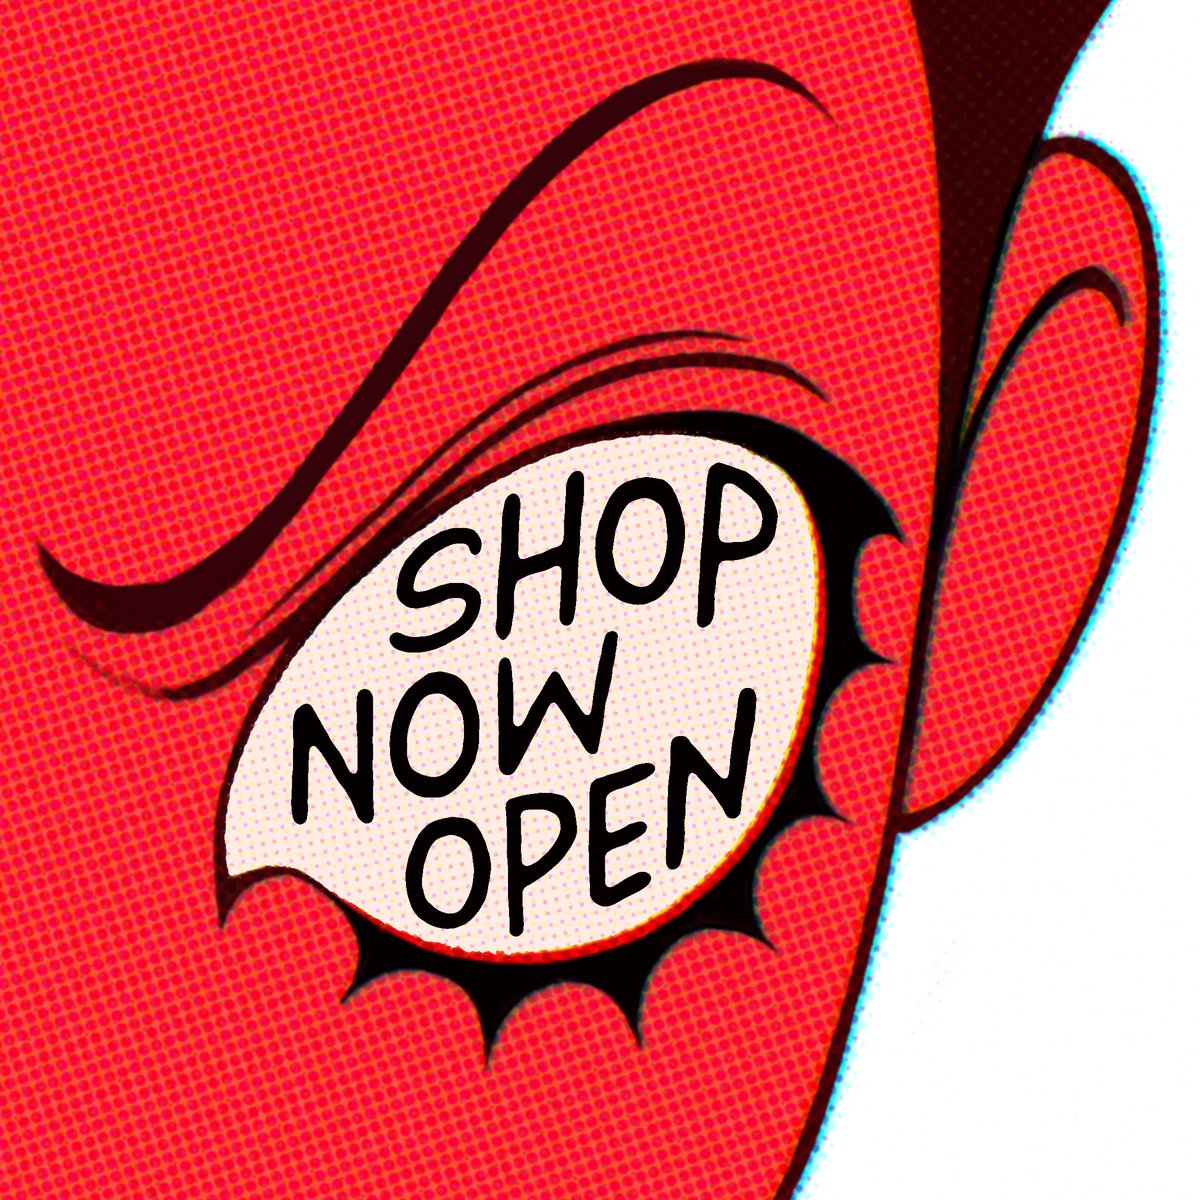 「shop now open! 」|svvのイラスト